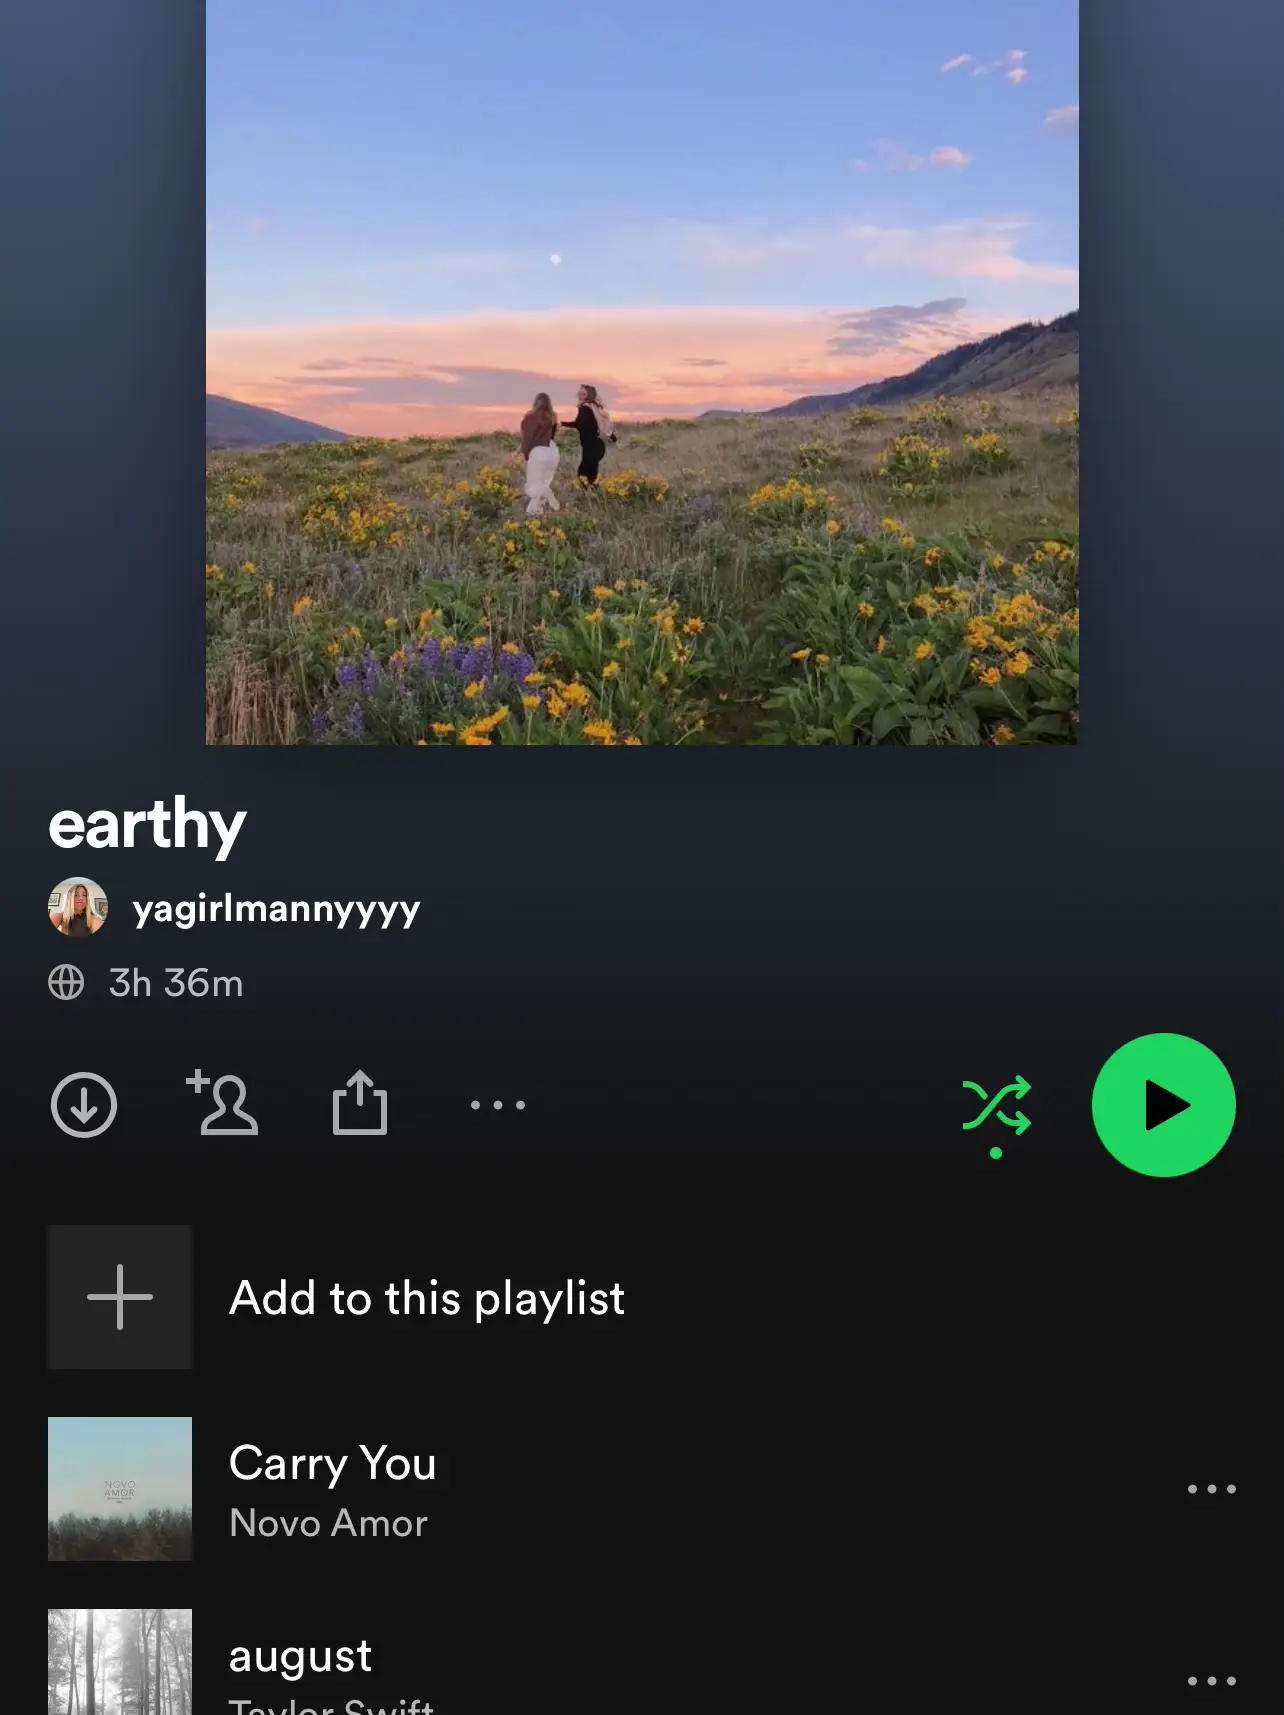  A playlist with a song by Earthy and a song by Novo Amor.